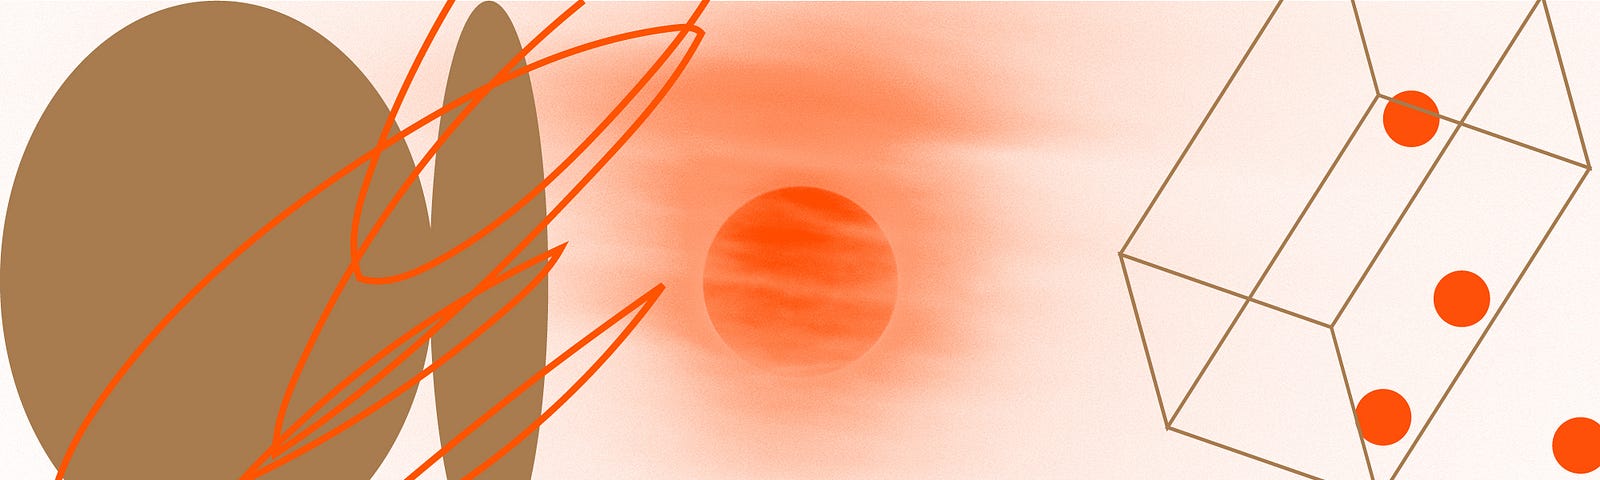 abstract illustration of a sun, with brown ovals, red squiggles, a brown box, and red dots.